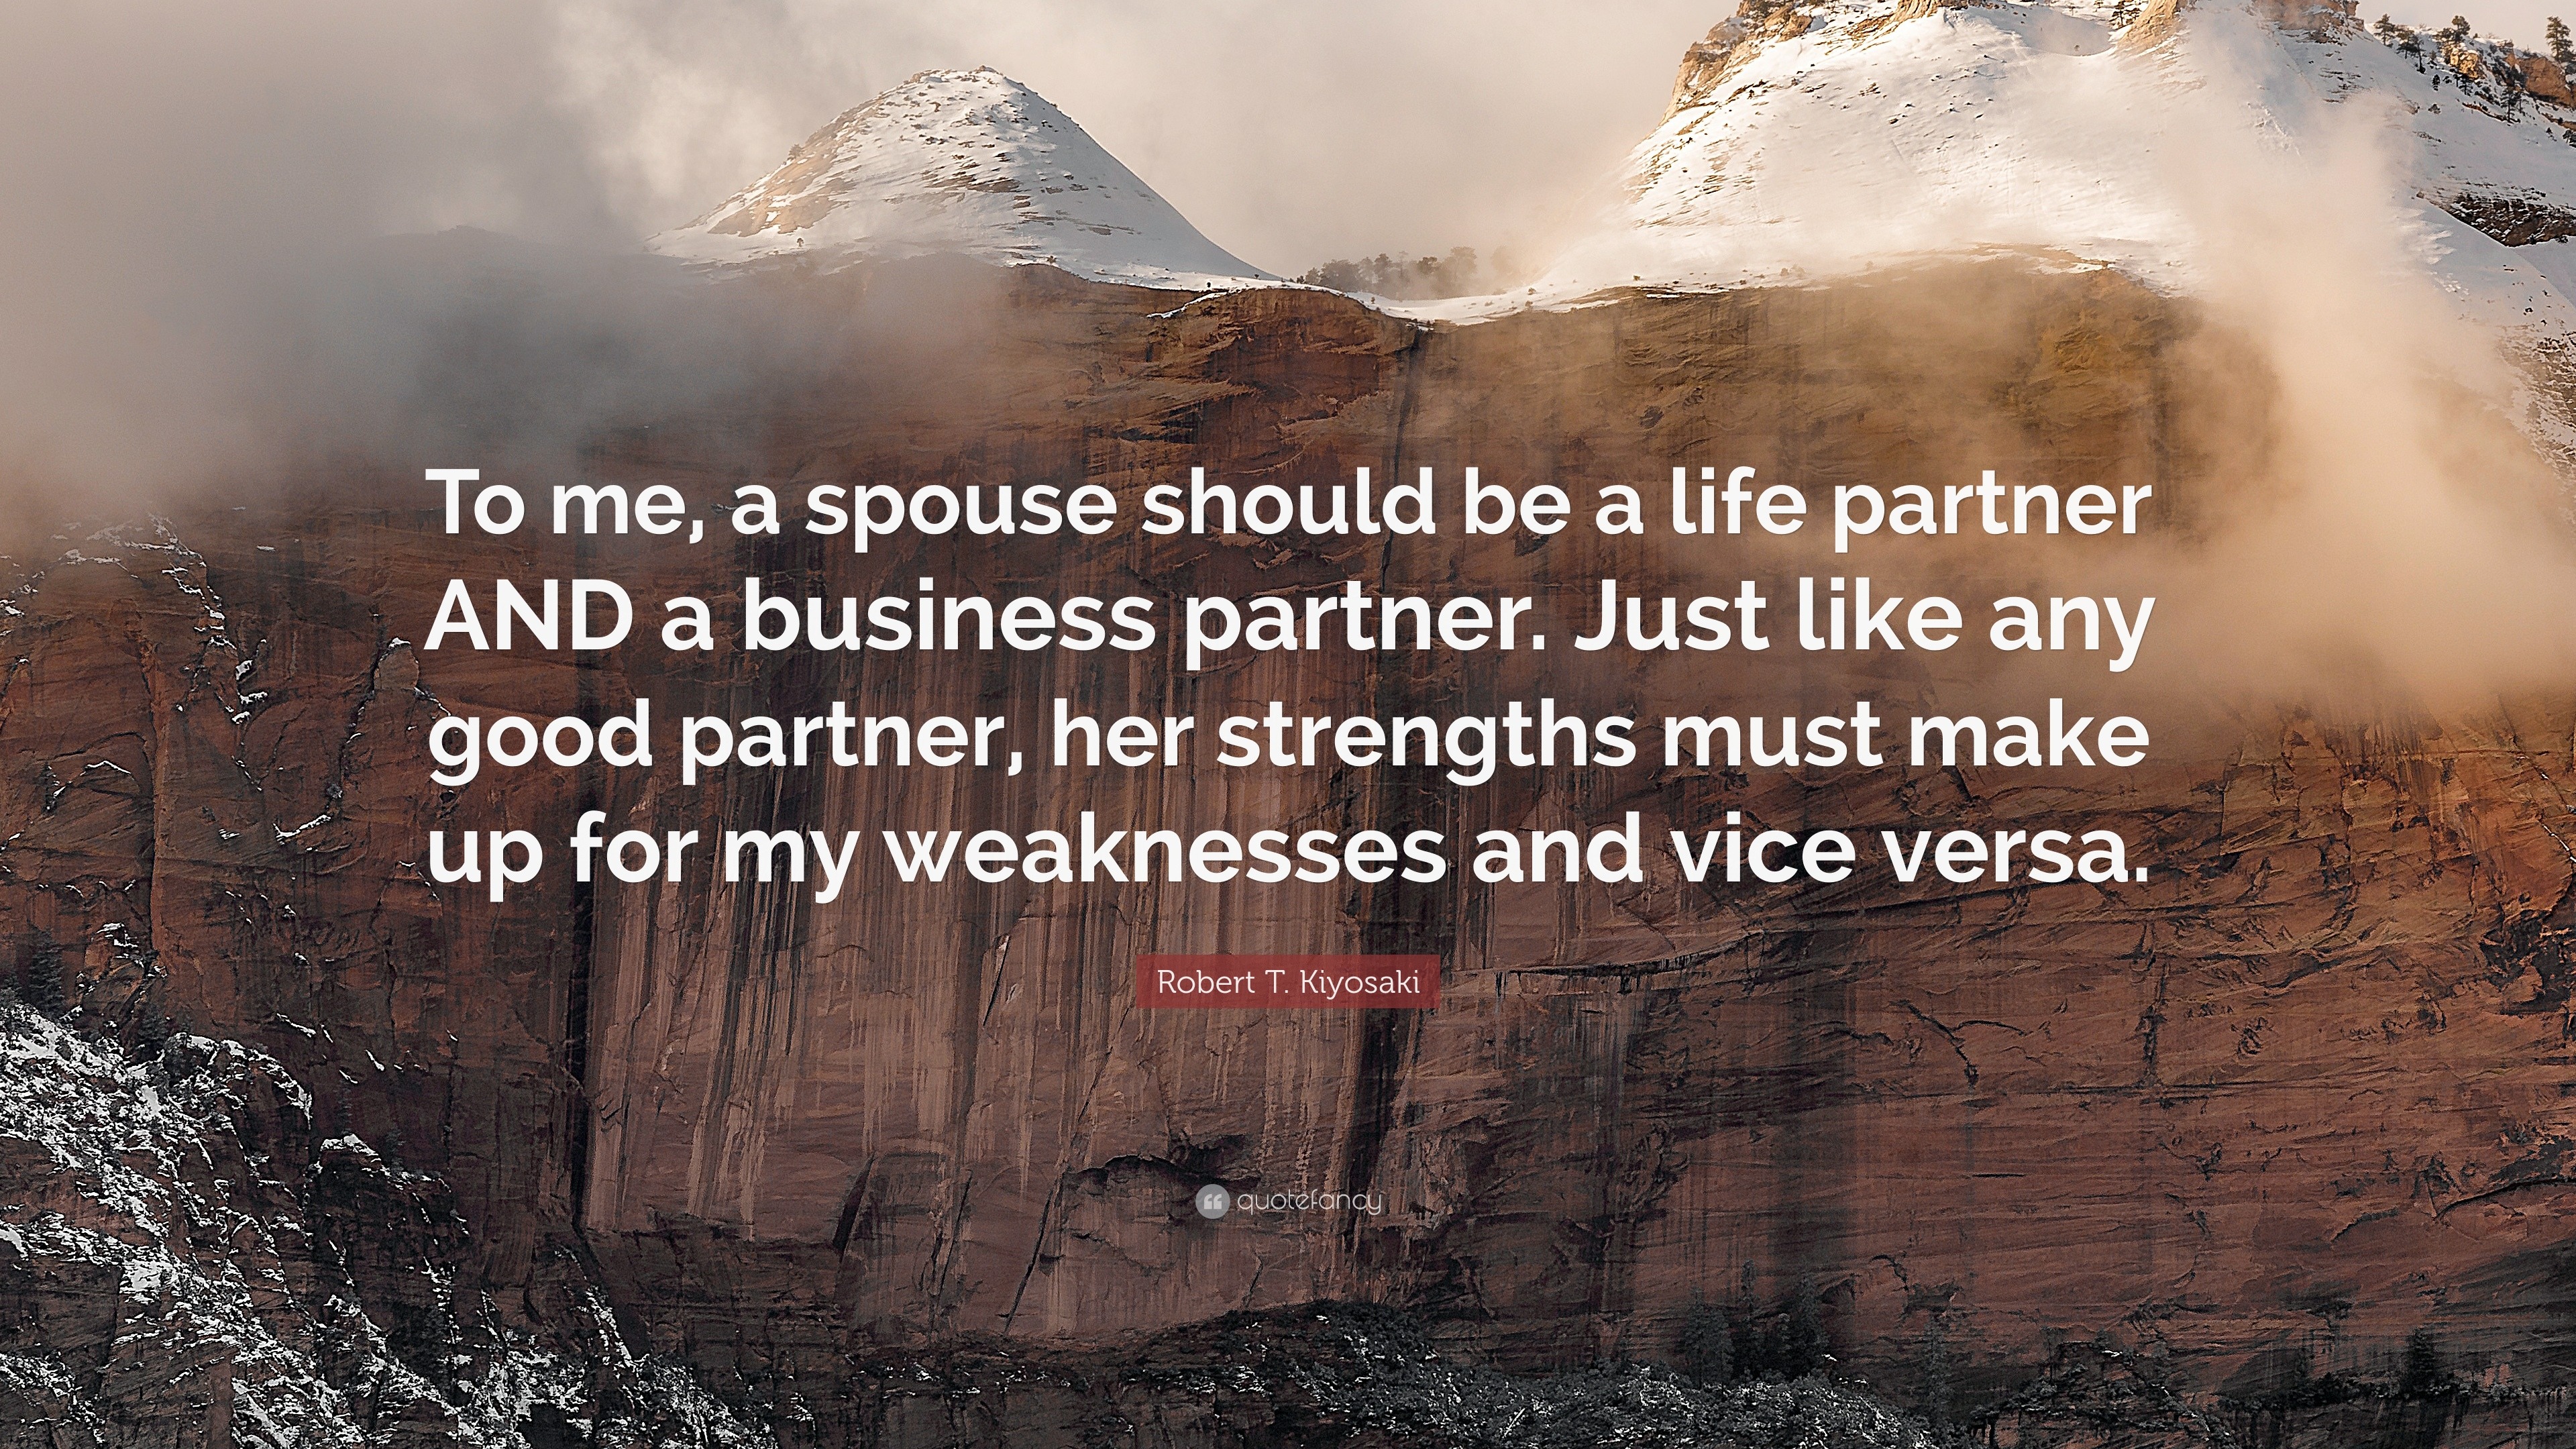 Robert T Kiyosaki Quote “To me a spouse should be a life